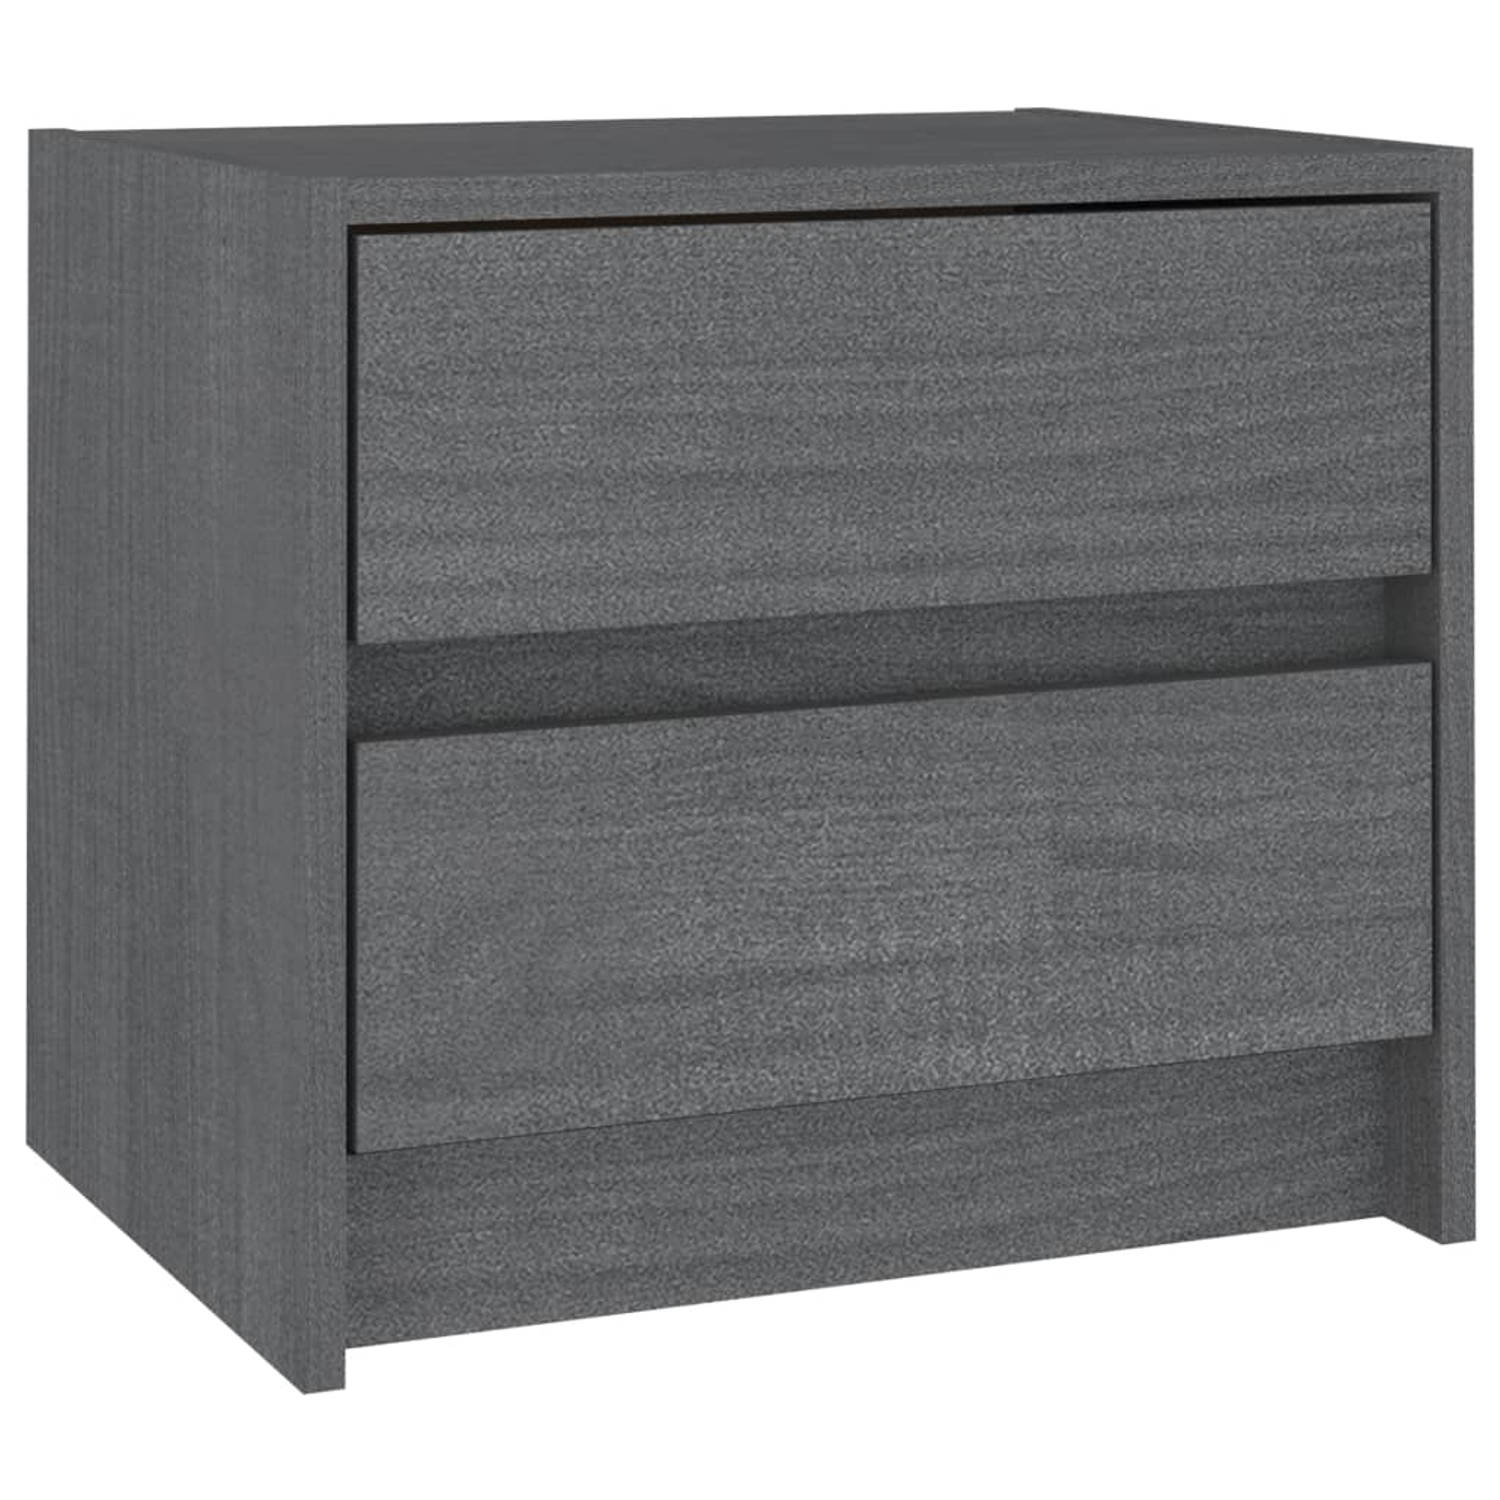 The Living Store Nachtkastje - Rustieke Charme - Hout - 40x30.5x35.5 cm - 2 Lades